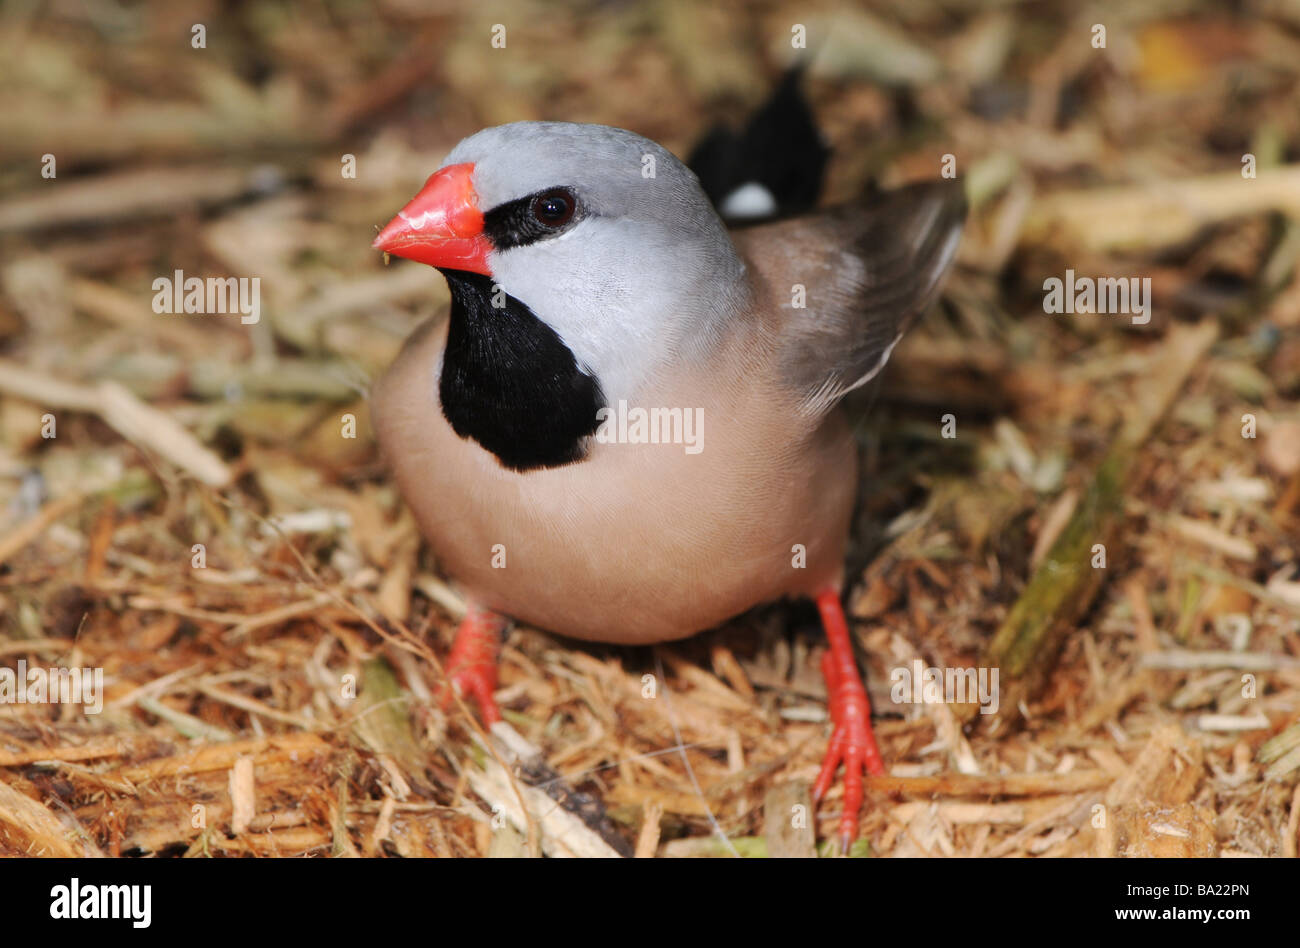 Shaft-tail finch photographed in captivity Stock Photo